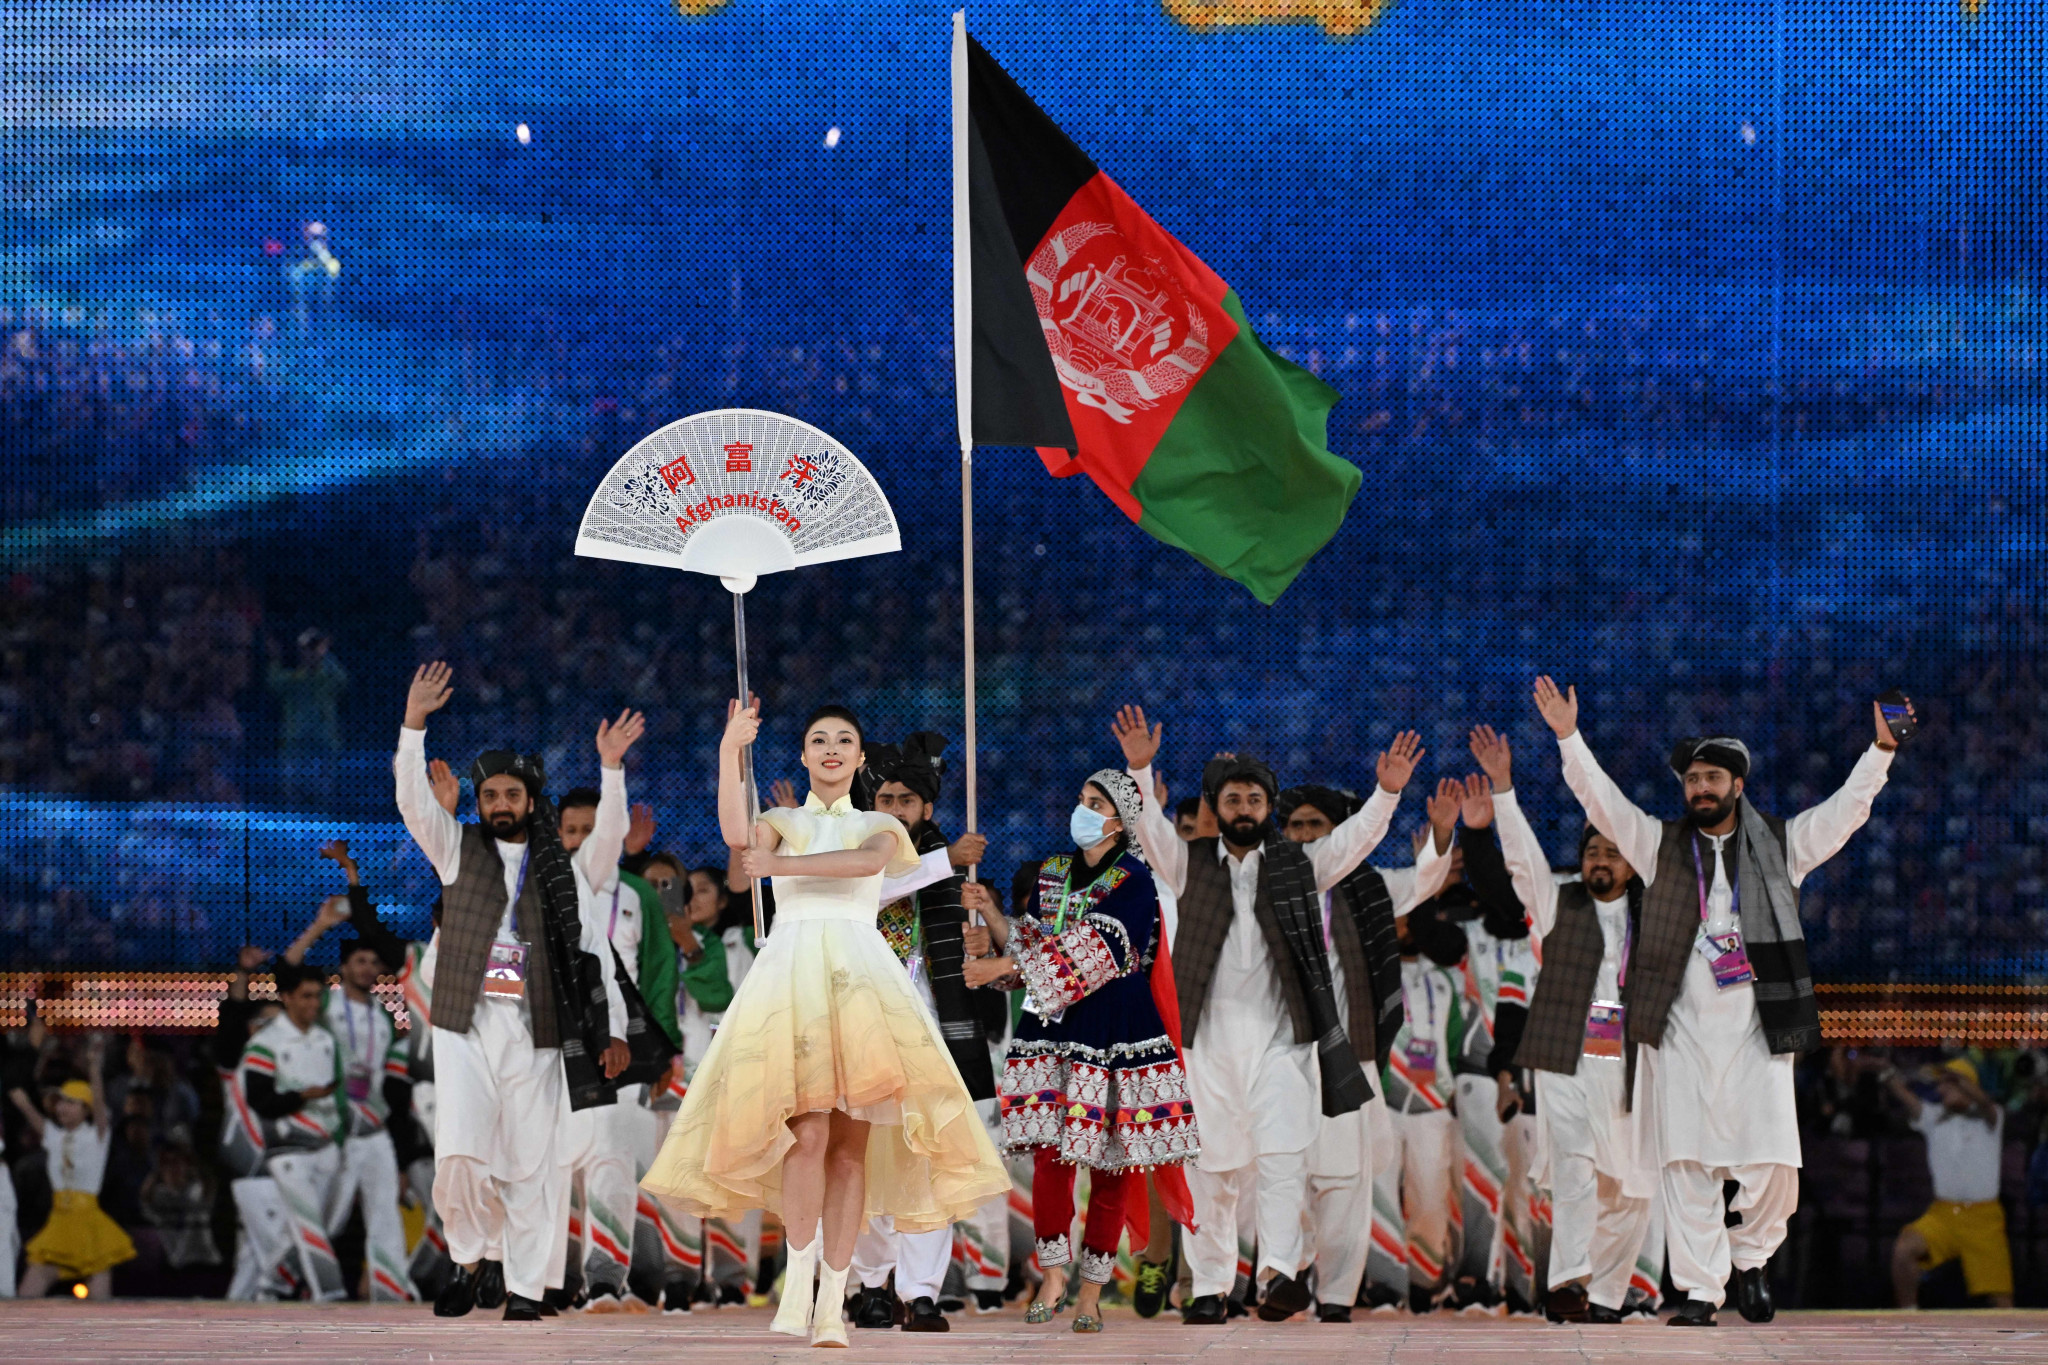 Afghan athletes were the first to participate in the Parade of Nations ©Getty Images